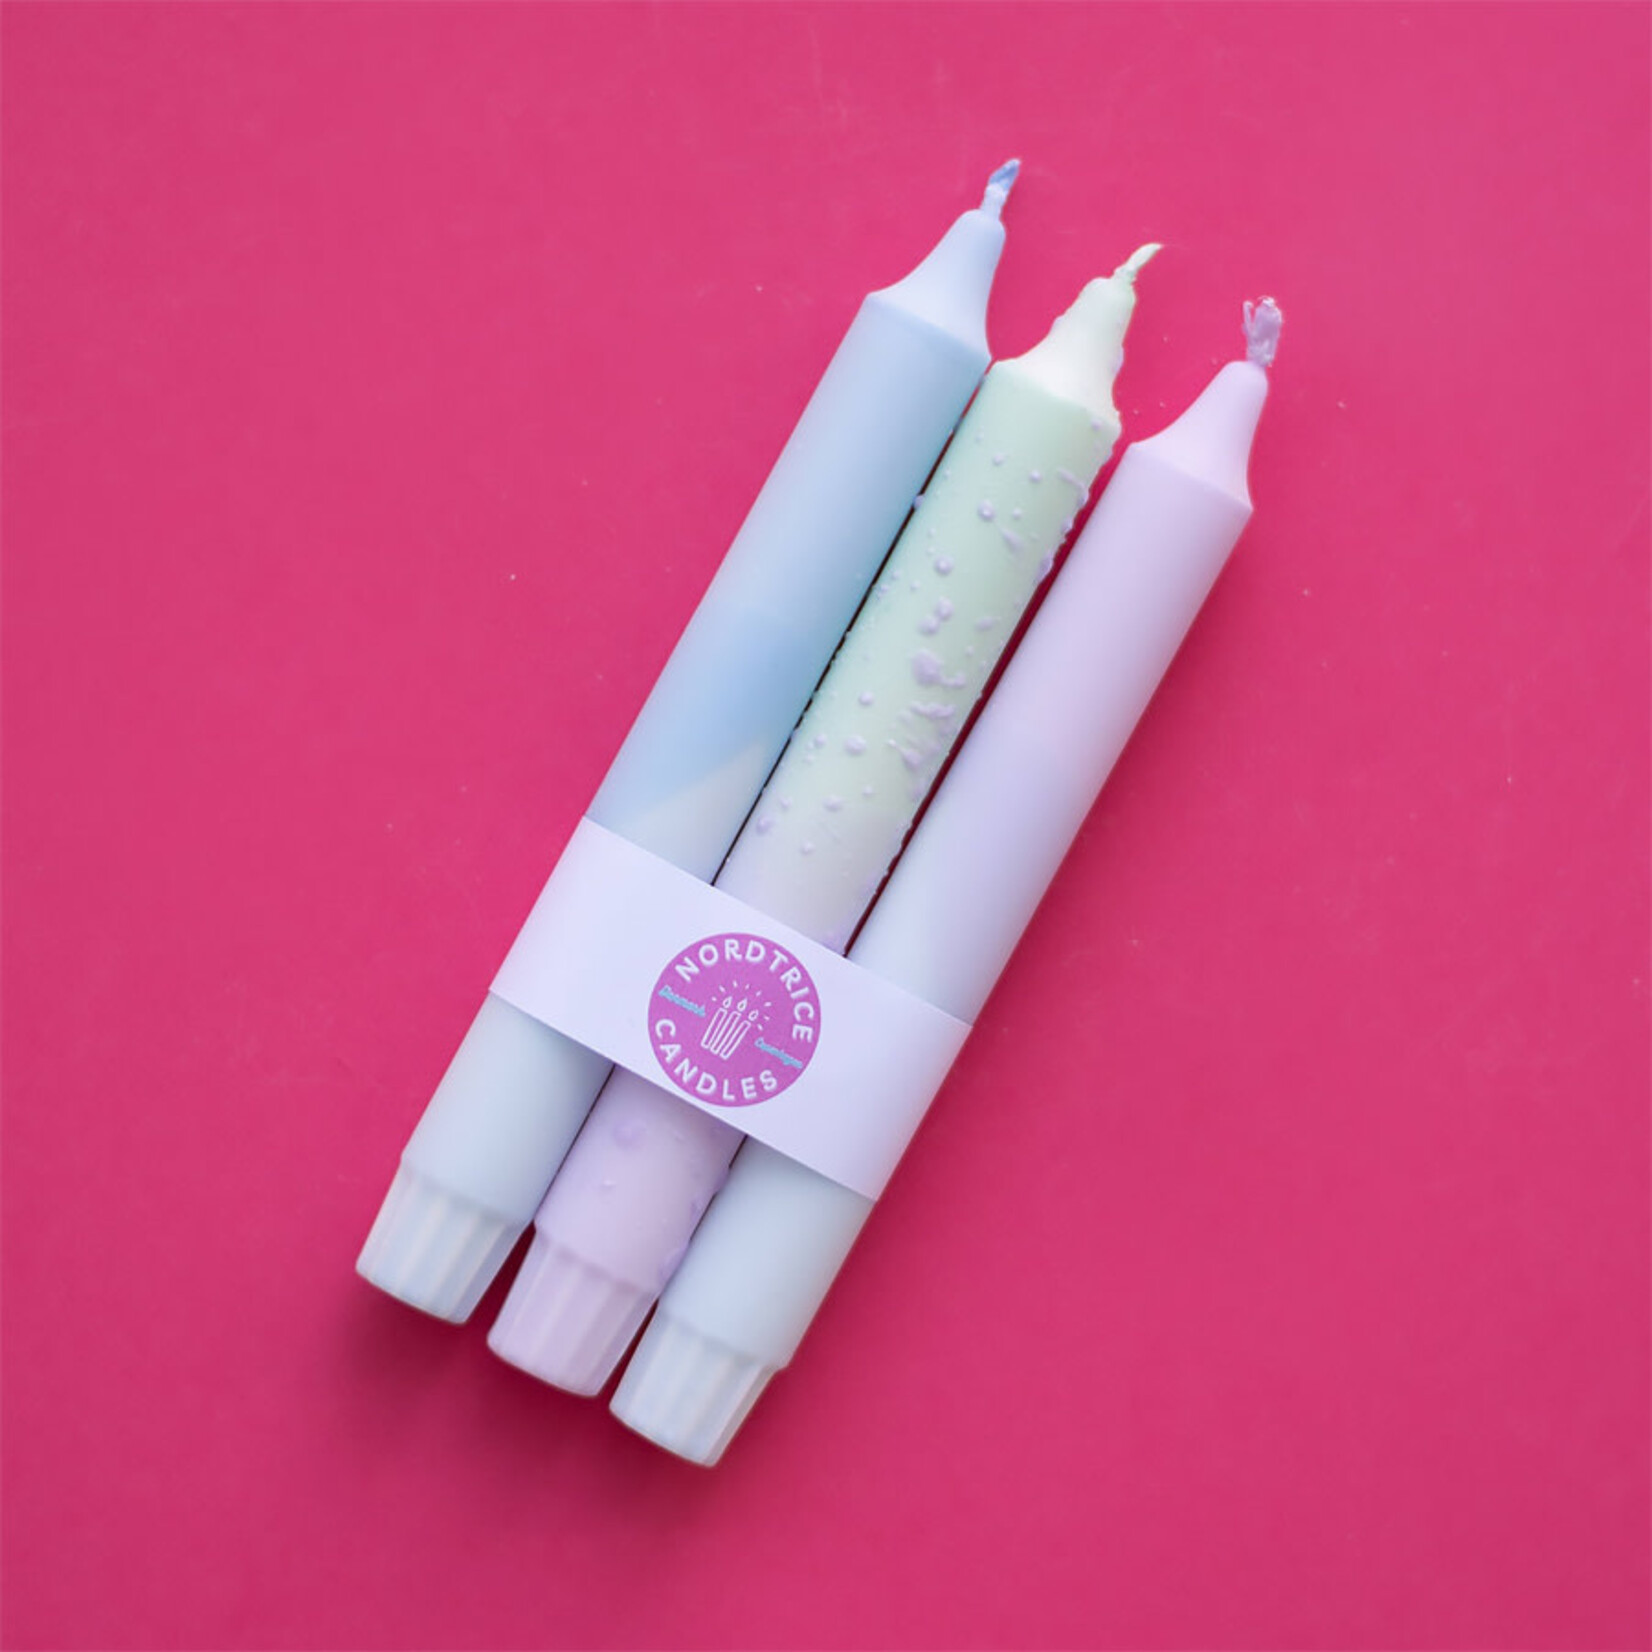 Nordtrice Taper Candles - 3 Pack